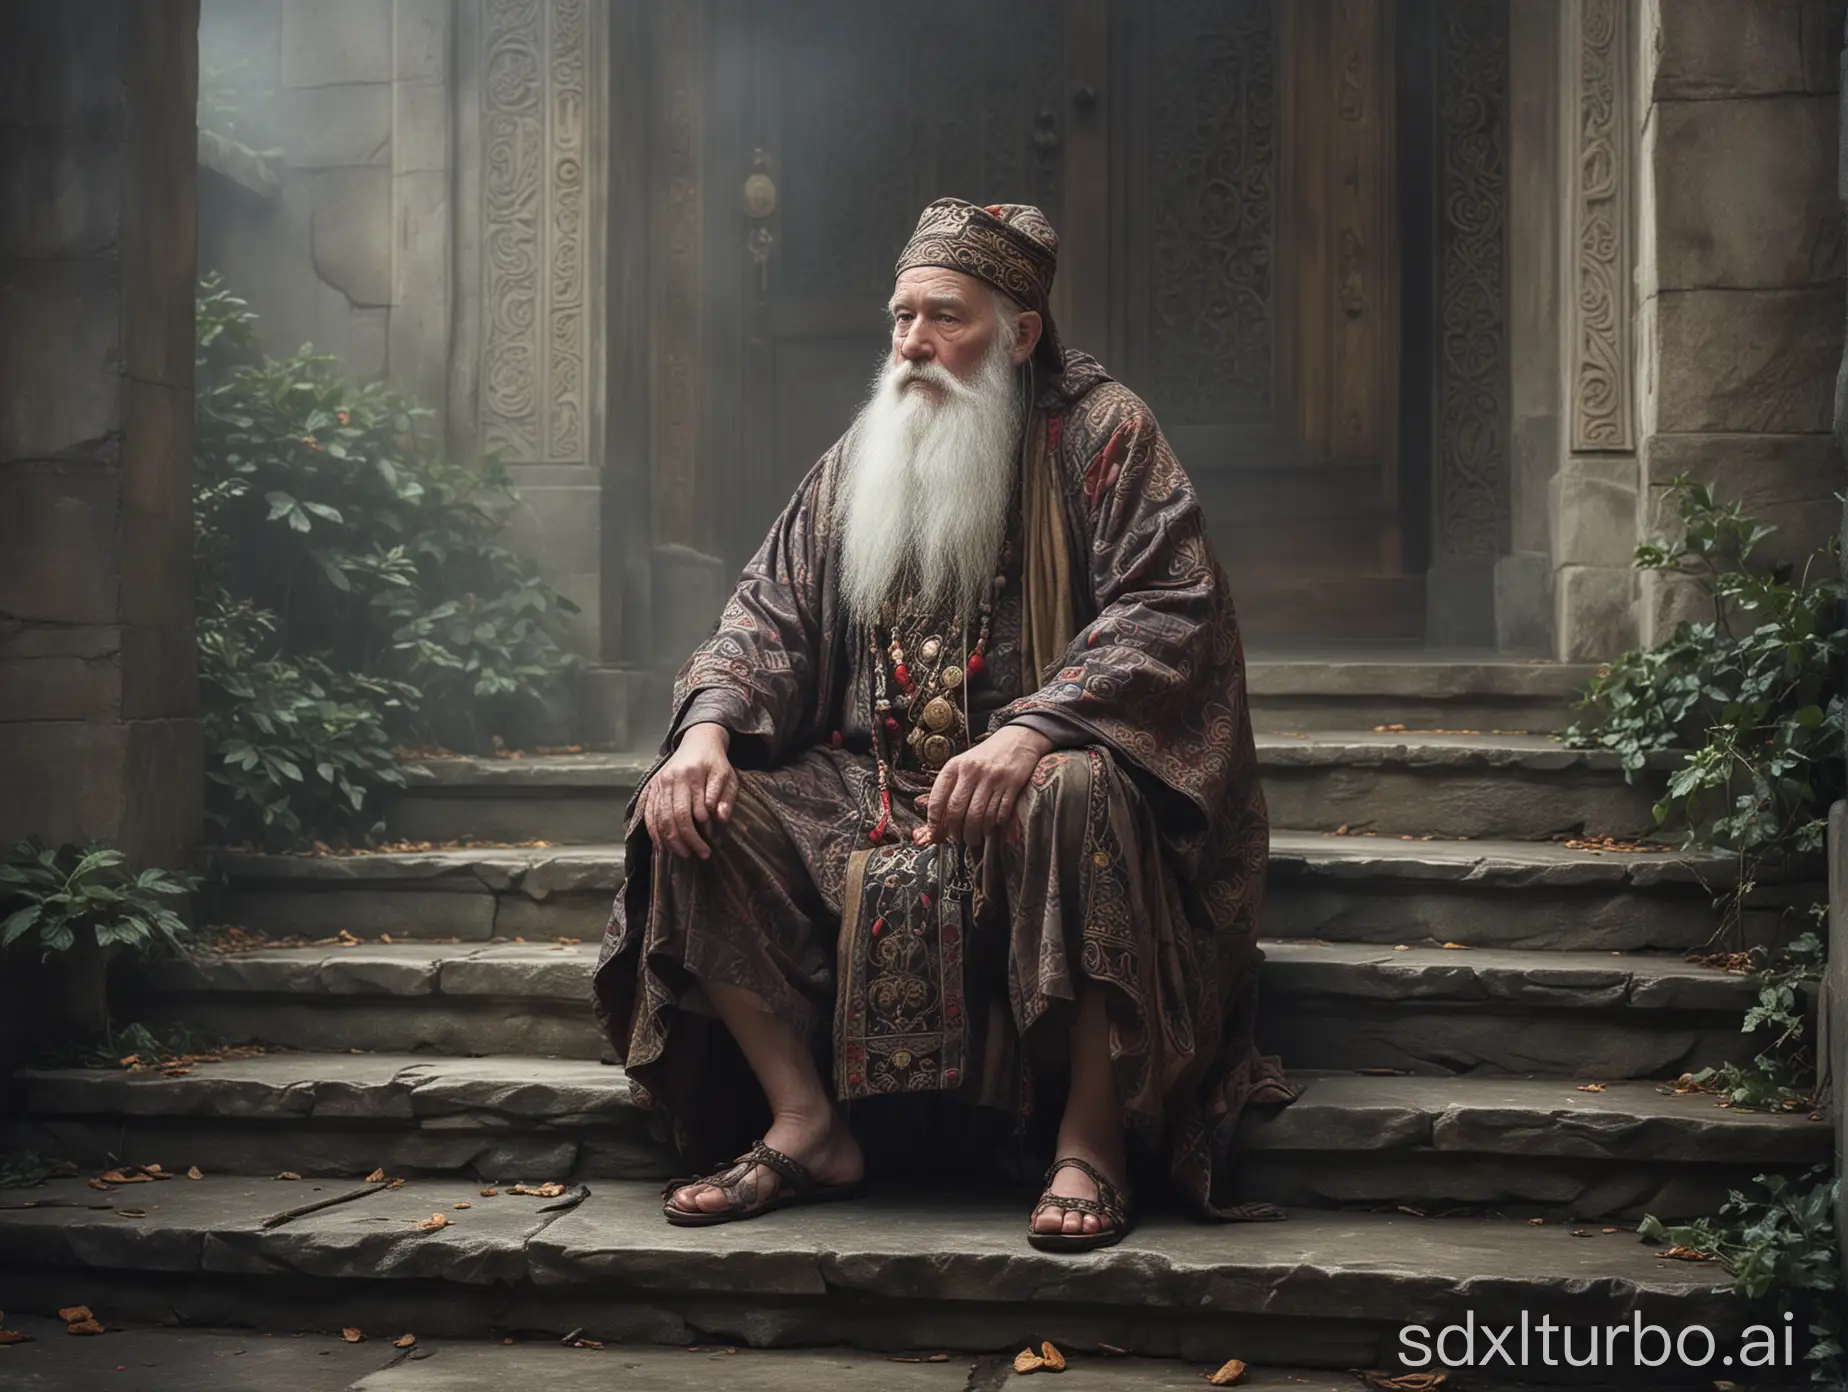 The image depicts an older man with a long white beard, sitting on stone steps that lead up to a grand doorway. He is dressed in what appears to be historical or fantasy attire, wearing a robe with intricate patterns and holding a staff. His posture suggests contemplation or waiting. The setting is foggy and the lighting subdued, creating an atmosphere of mystery or anticipation.